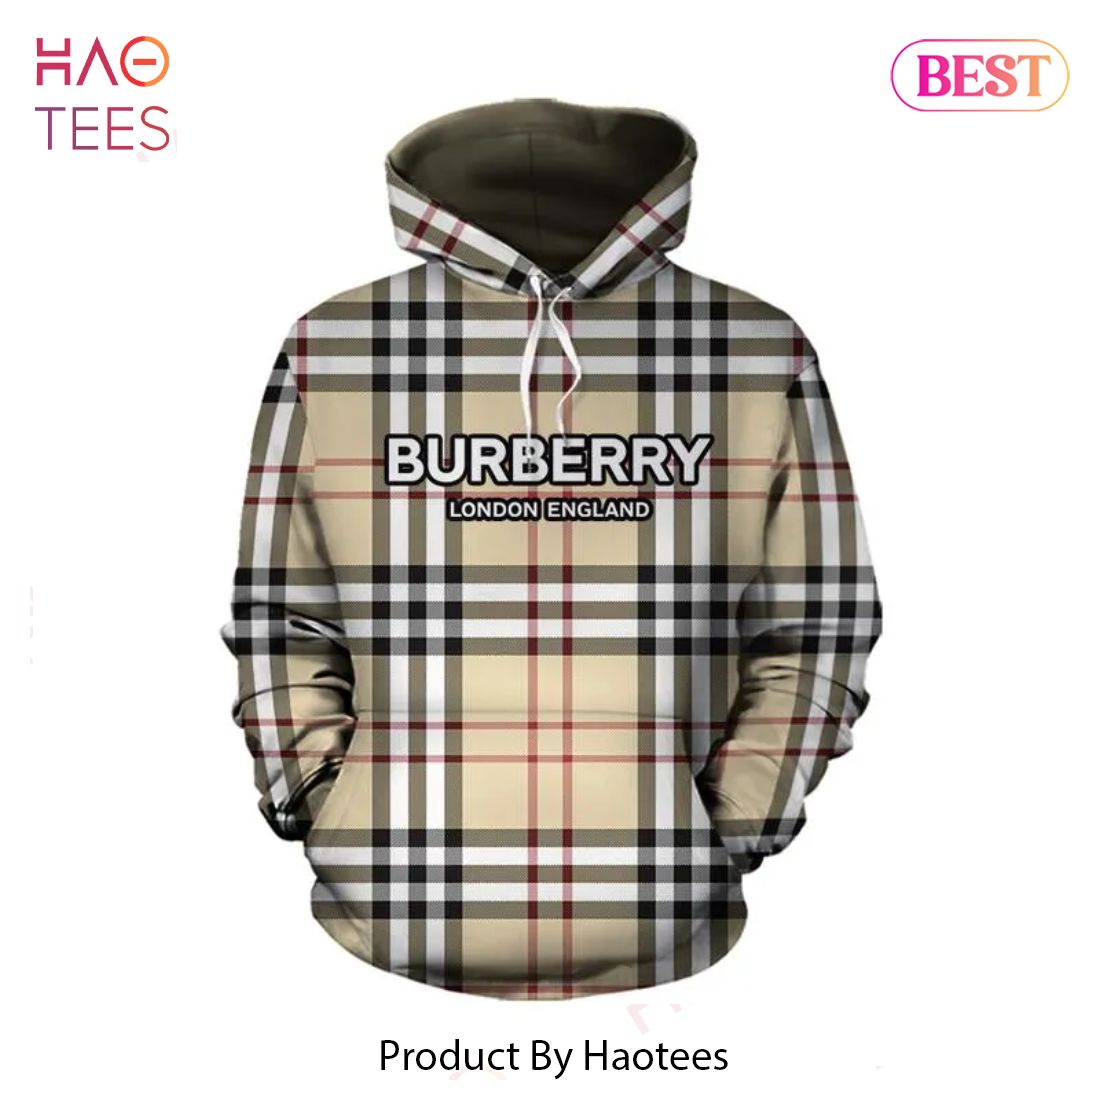 Burberry London England Unisex Hoodie For Men Women Luxury Brand Clothing Clothes Outfit